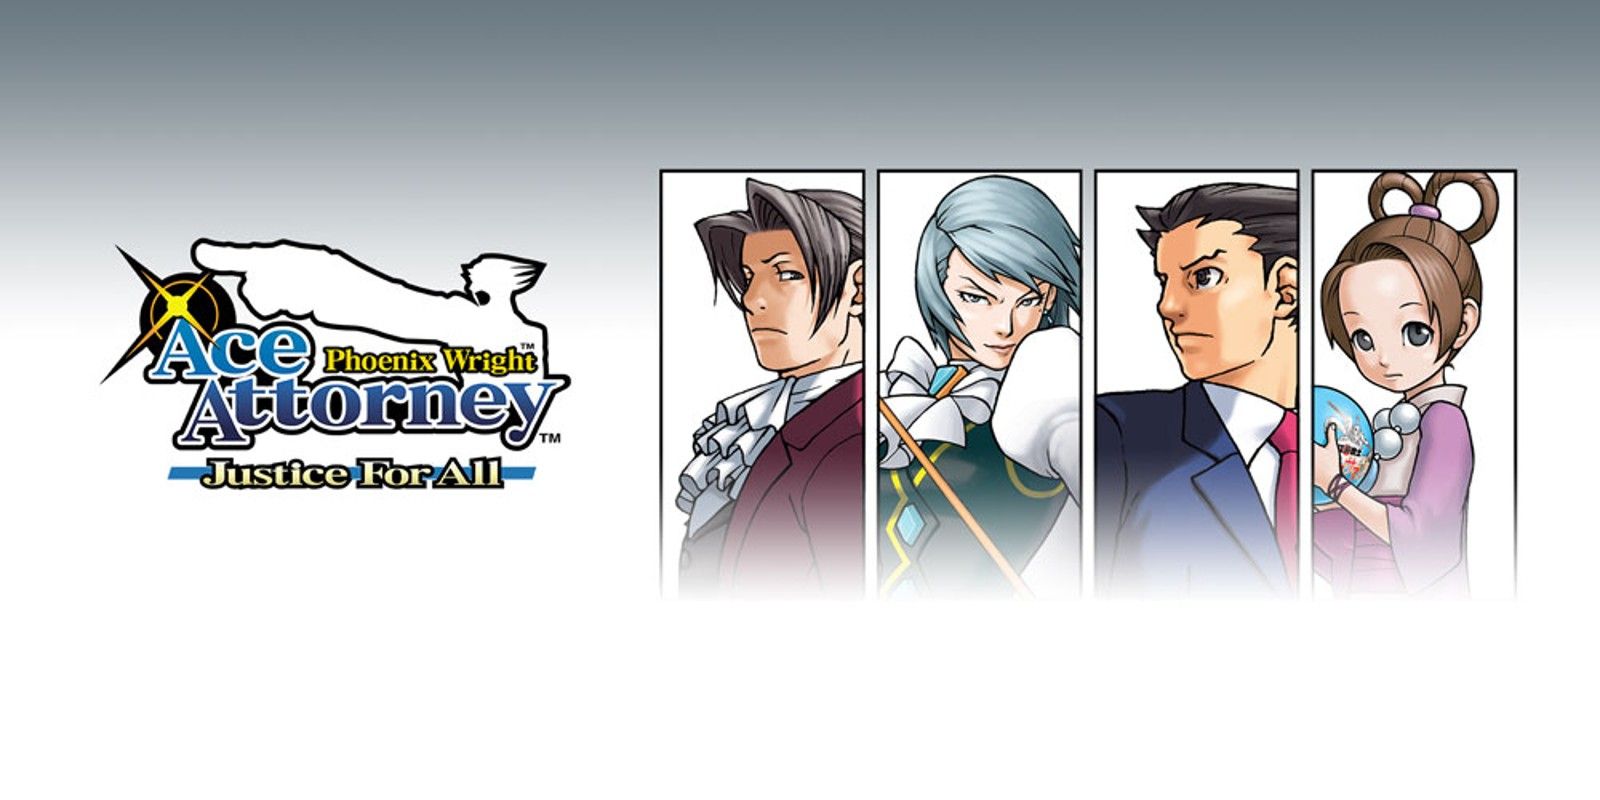 Ace Attorney Justice For All promo art